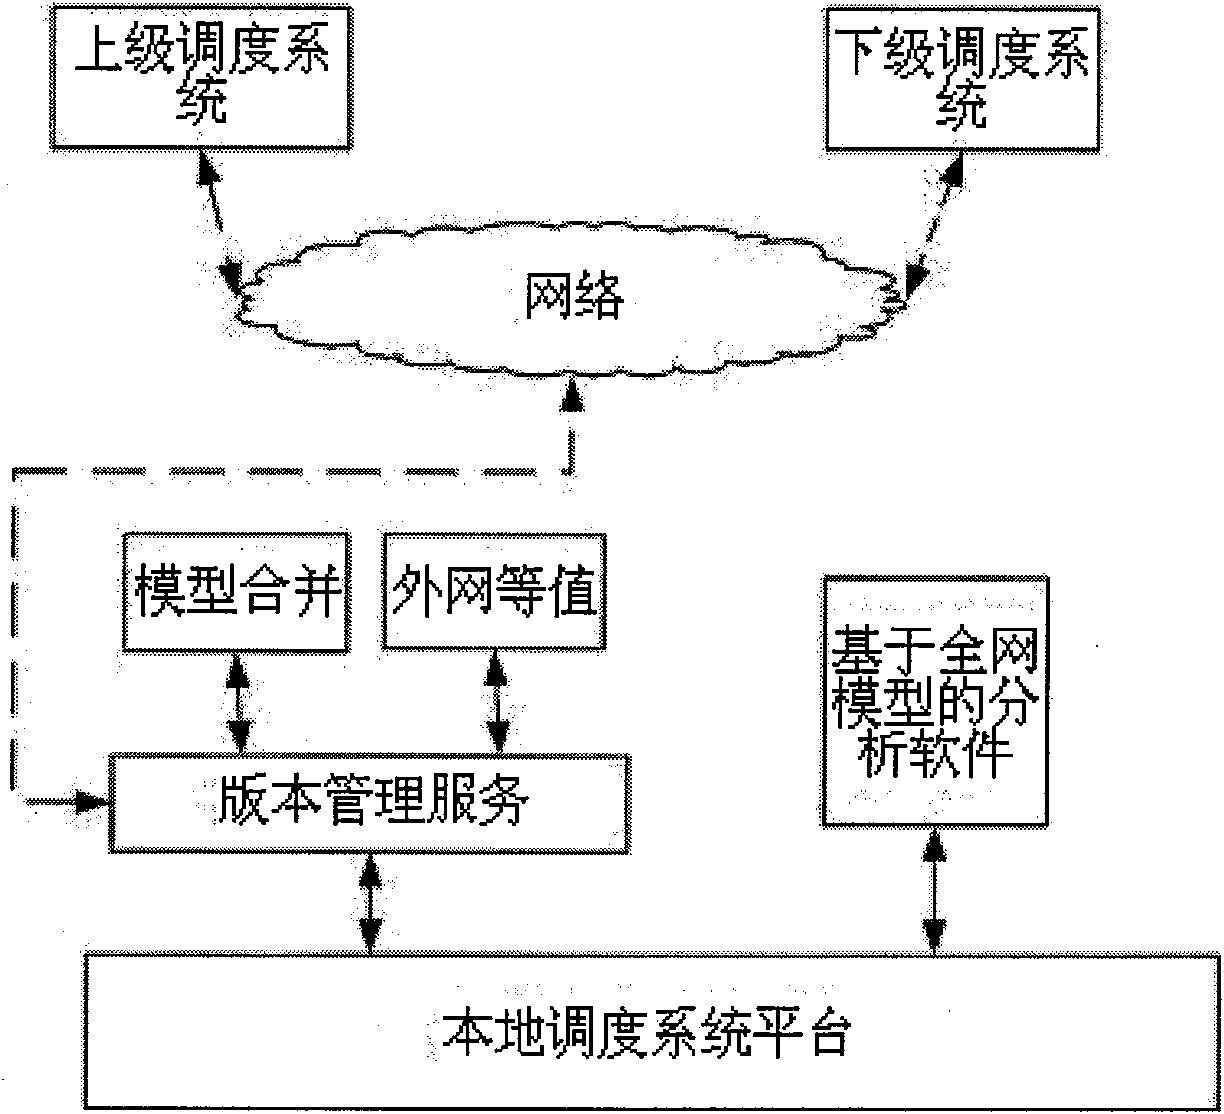 Interconnected power system oriented hierachical decomposition space-time cooperative modeling method